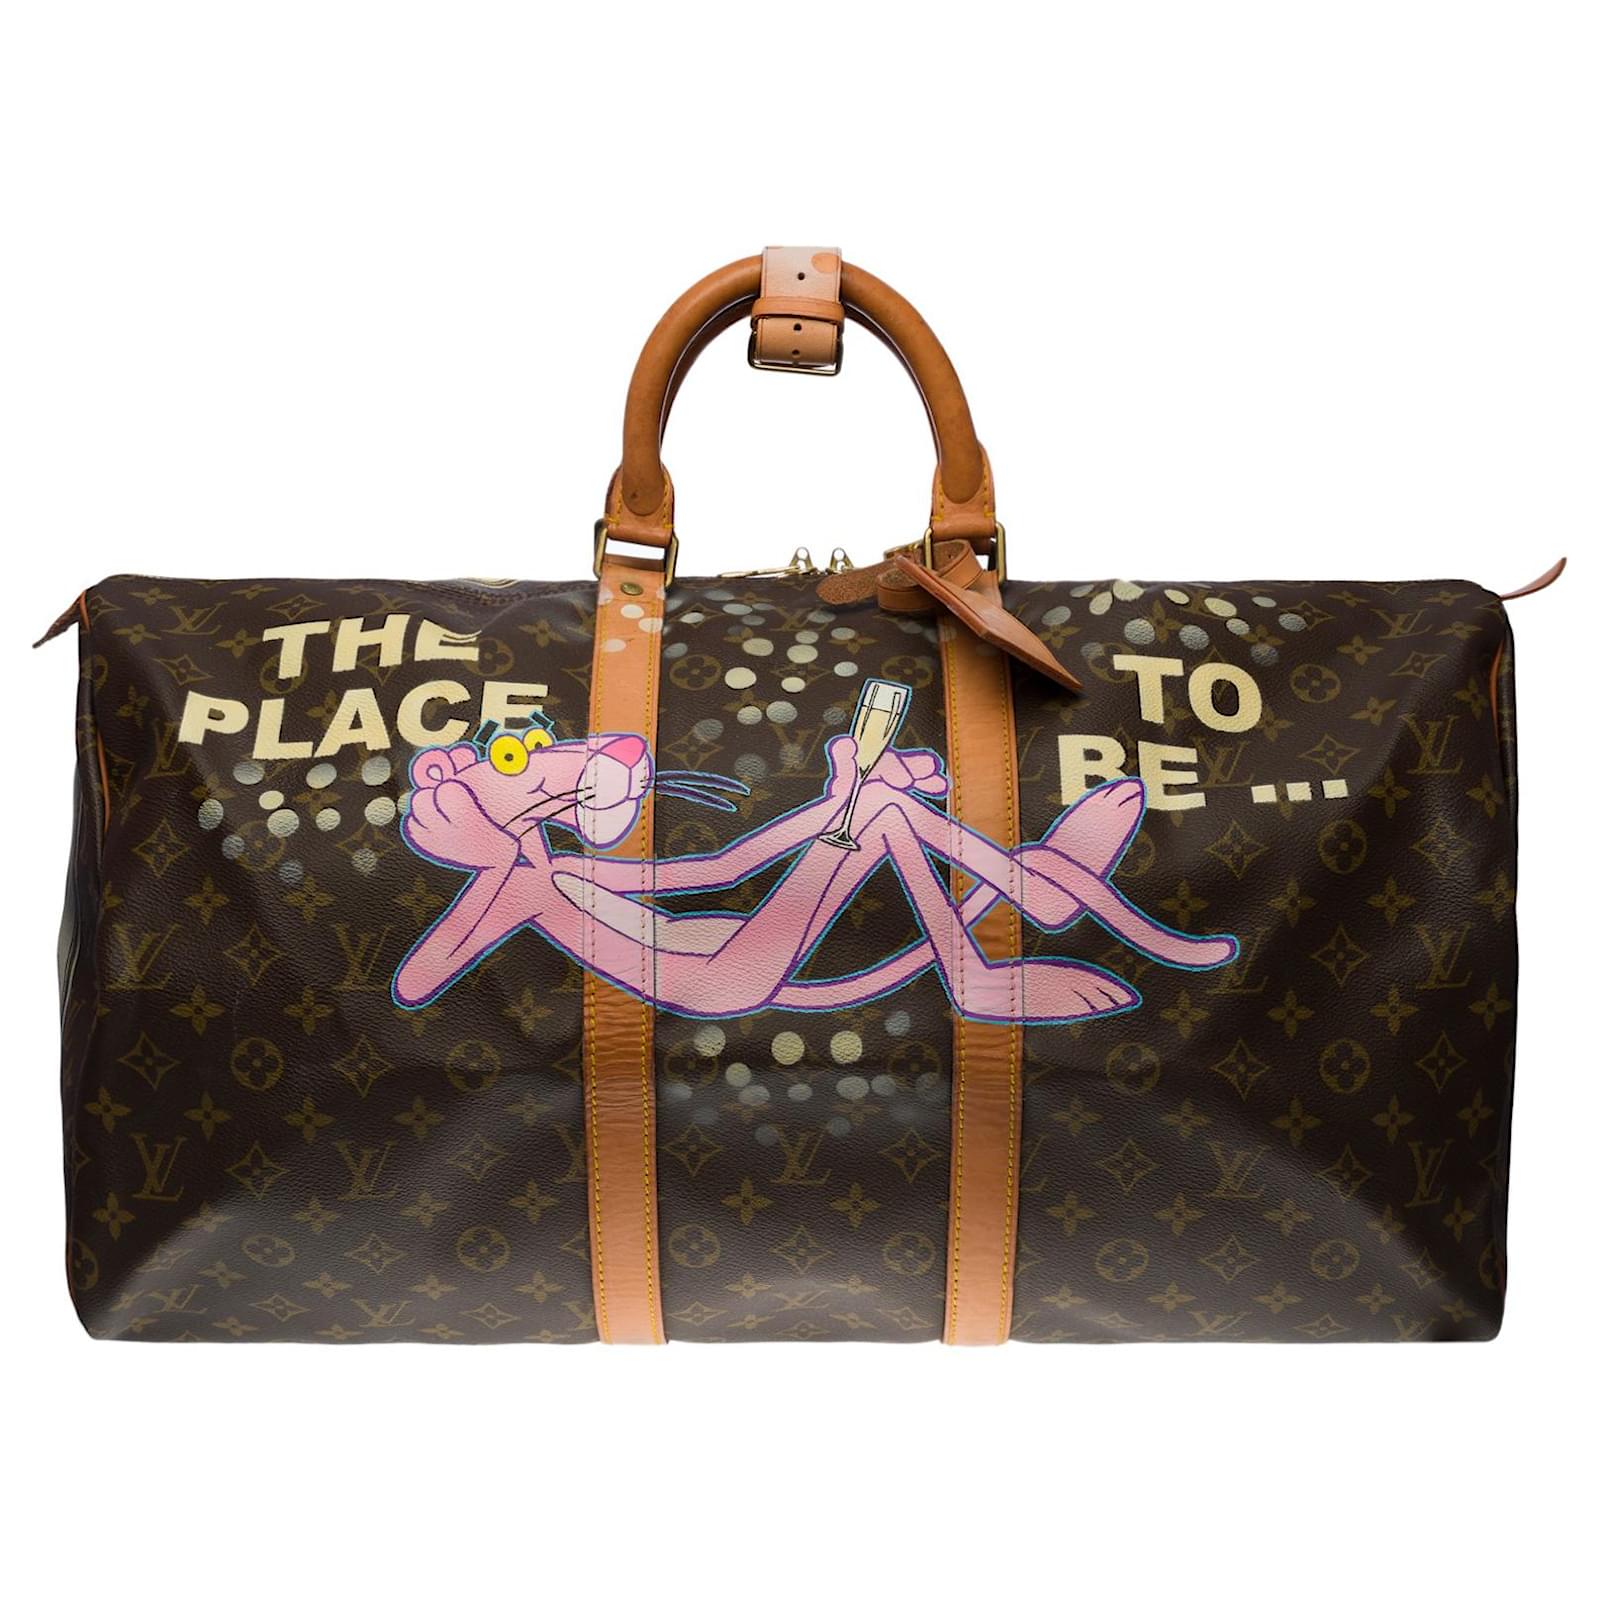 Louis Vuitton Keepall 55 cm Travel Bag in Brown Monogram Canvas and